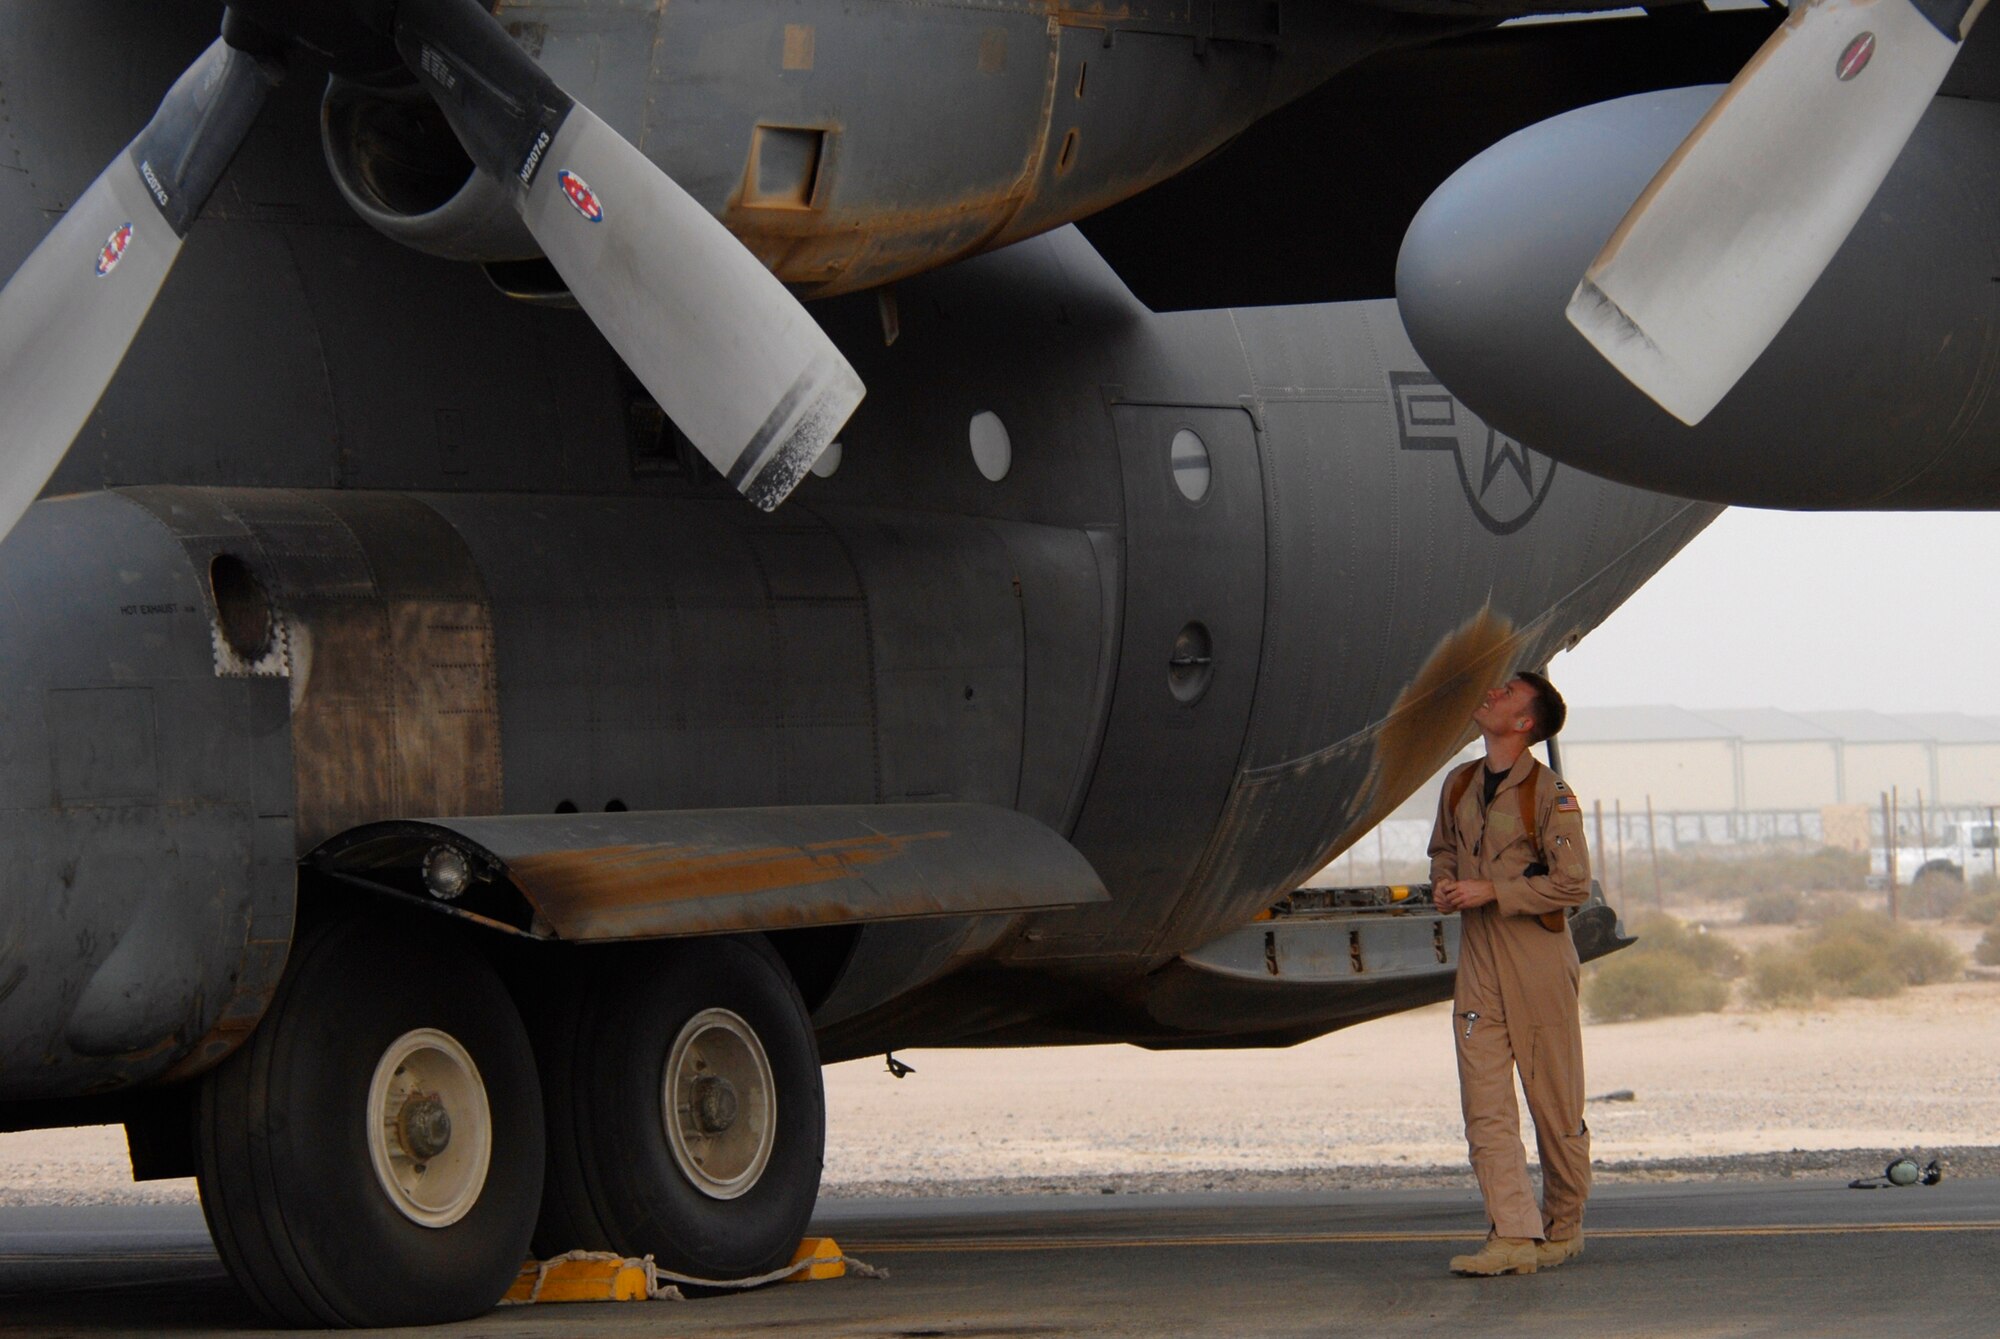 SOUTHWEST ASIA -- Captain Thomas Knaust, a C-130 Hercules pilot deployed to the 737th Expeditionary Airlift Squadron, performs a pre-flight walk around on a C-130 Hercules prior to the take-off of a combat sortie that transported Soldiers into Iraq April 21, 2008, from an air base in the Persian Gulf Region. The Air Force recently surpassed more than one million sorties flown by Air Force aircraft in the Global War on Terror since Sept. 11, 2001. Synchronized and integrated into larger coalition air efforts, these missions represent the most deliberate, disciplined and precise air campaign in history. Captain Knaust is deployed from the 317th Operations Support Squadron, Dyess Air Force Base, Texas. (U.S. Air Force photo/ Staff Sgt. Patrick Dixon)